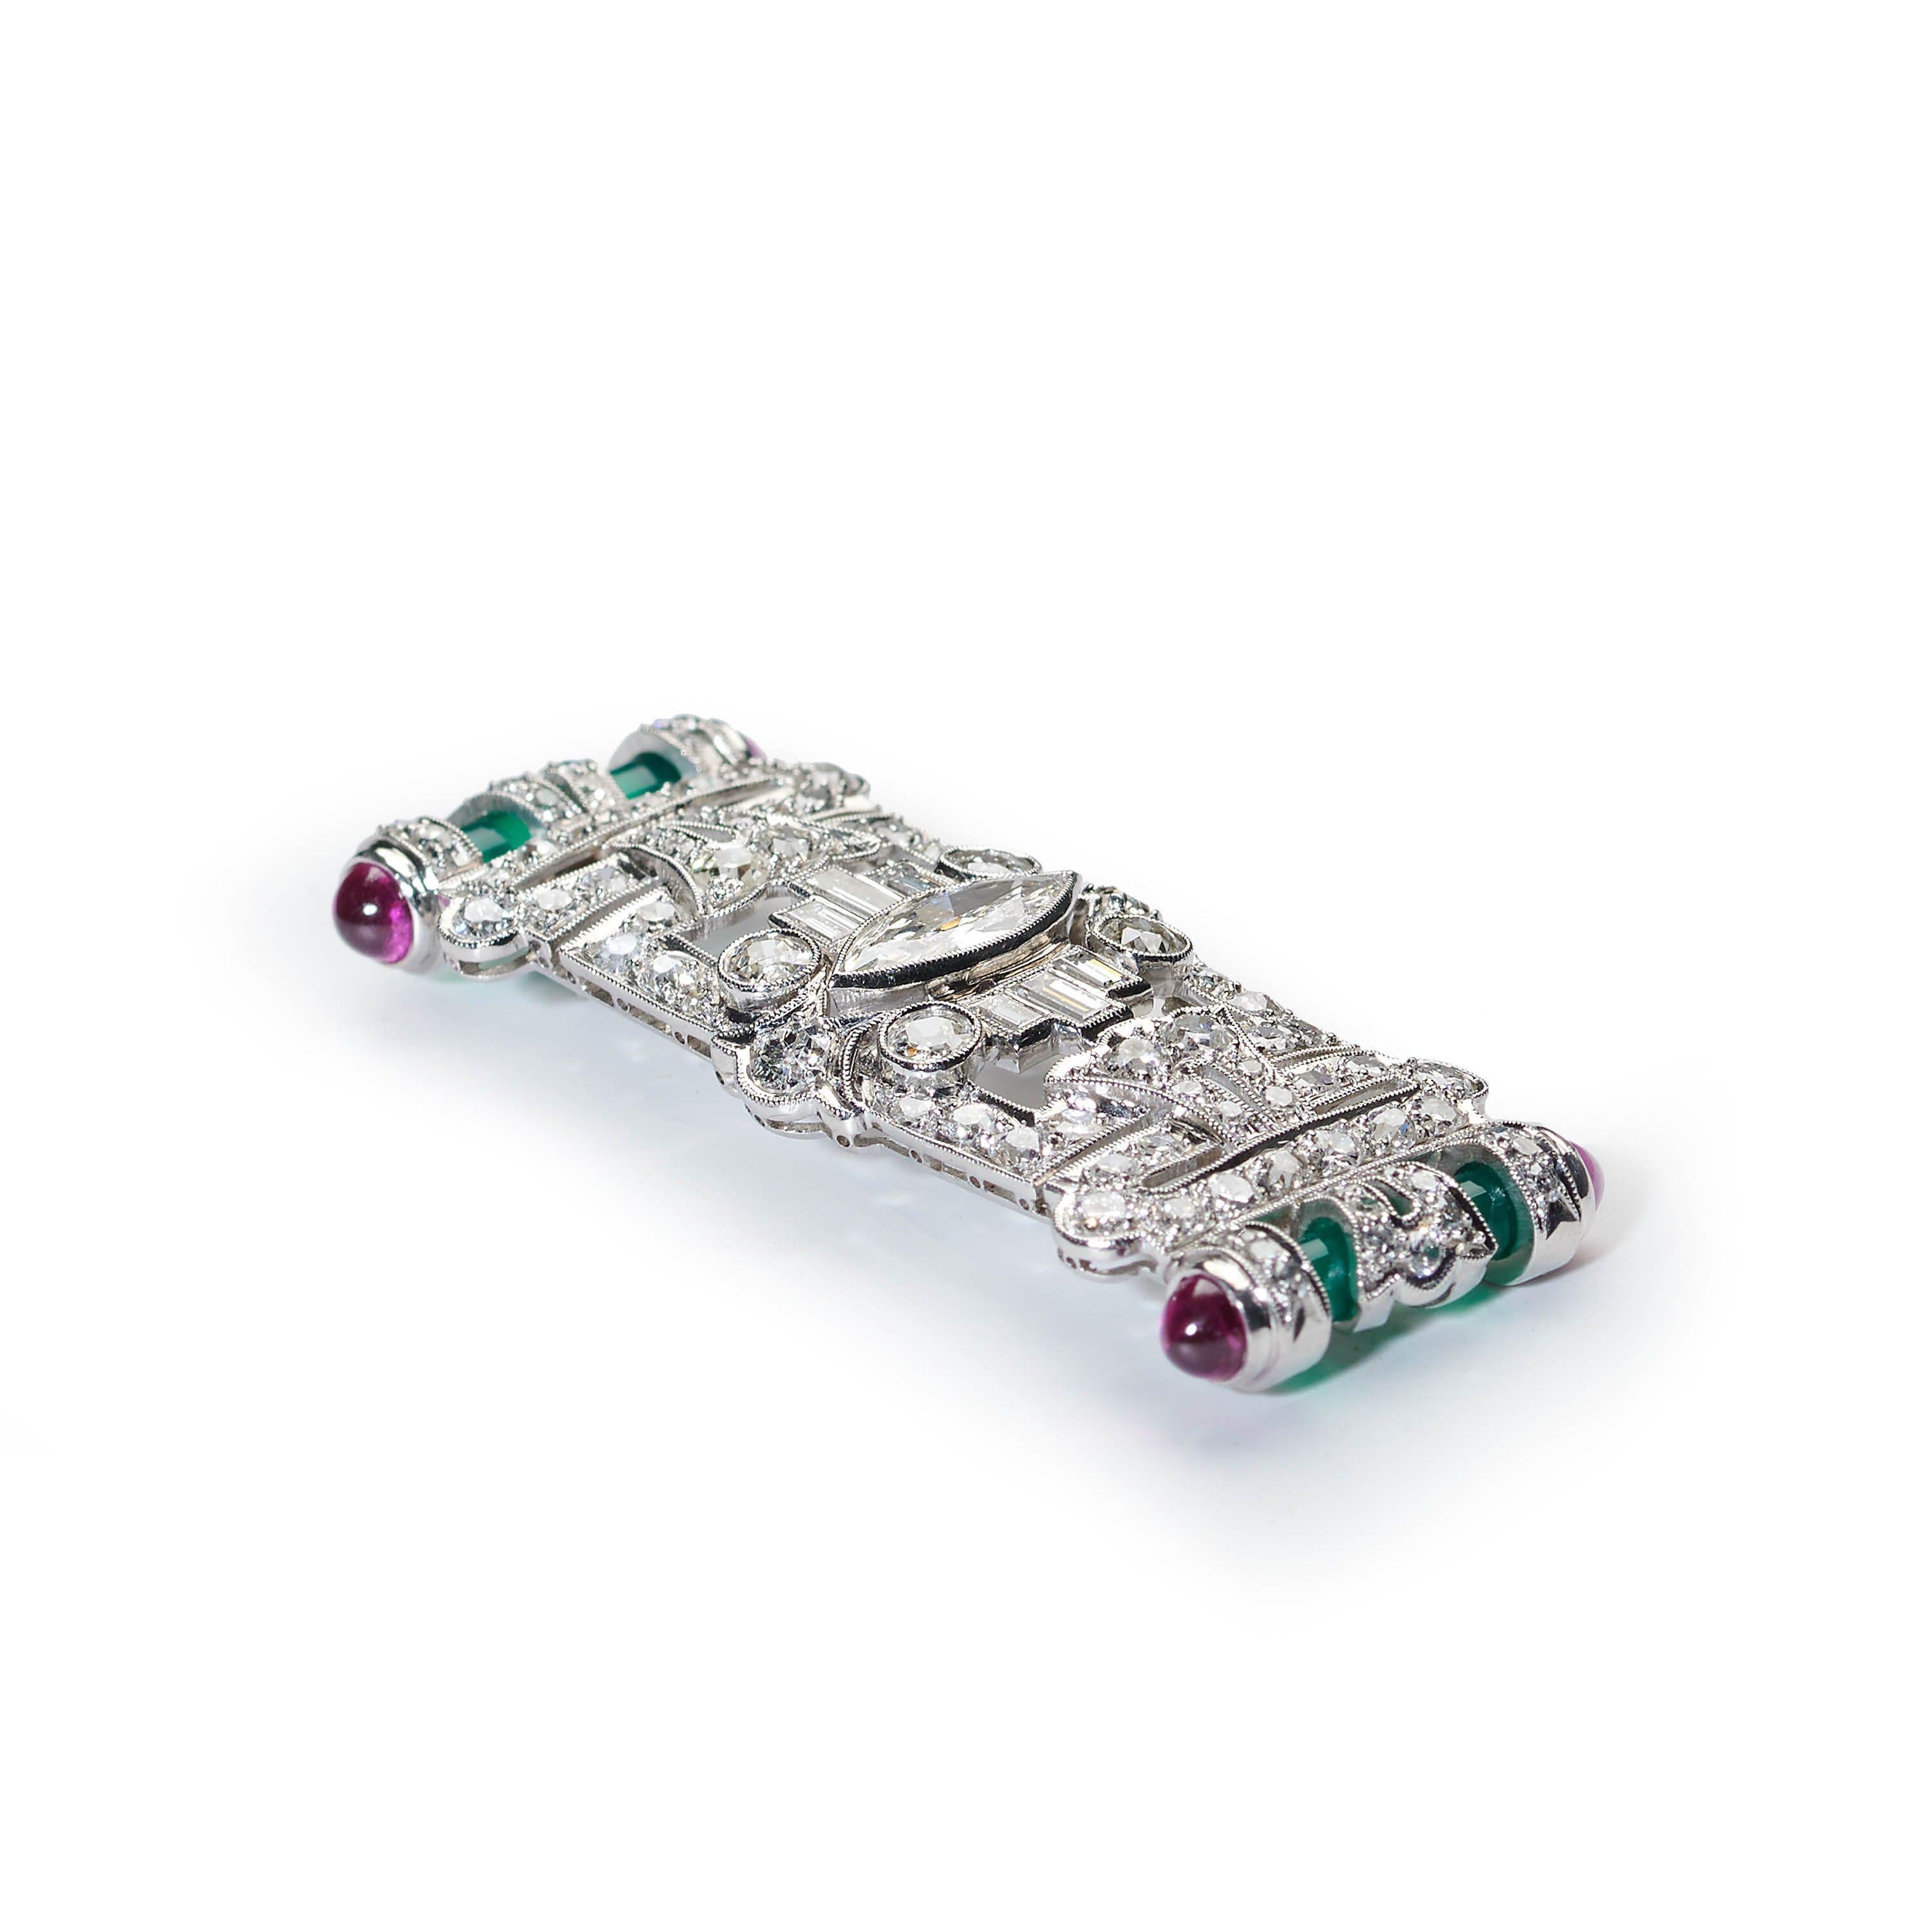 An Art Deco style diamond, green agate and ruby brooch, set with a central marquise diamond, with three baguette-cut diamonds either side, in rub over settings  and trefoils of old-cut diamonds above and below, onto a rectangle of old-cut, eight-cut